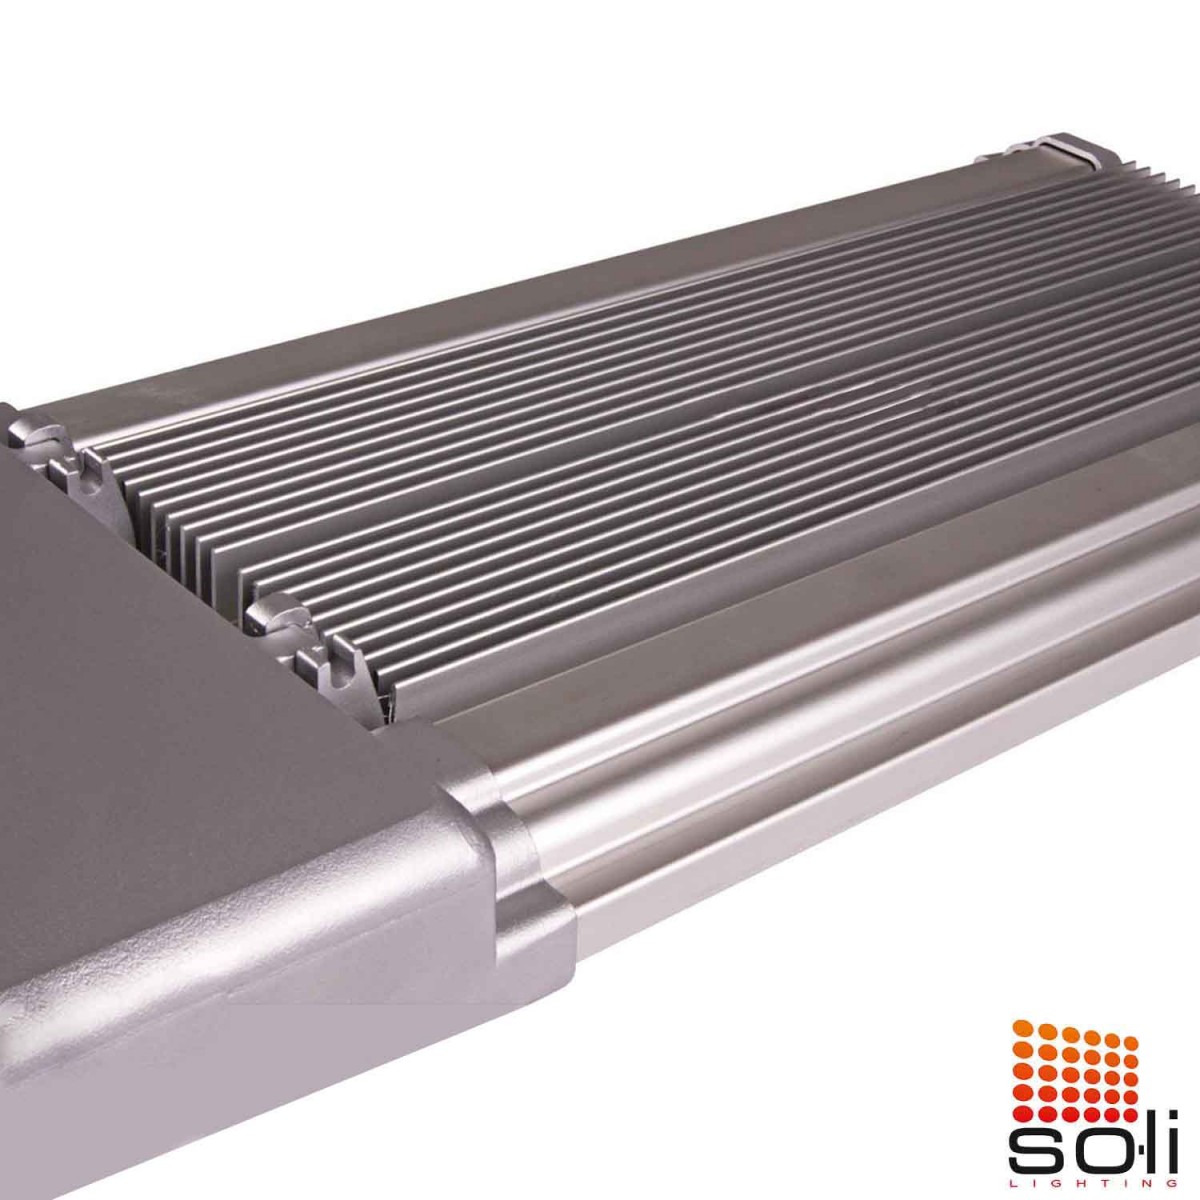 180W SK Series LED Road and Street Lighting Fixture - SK180